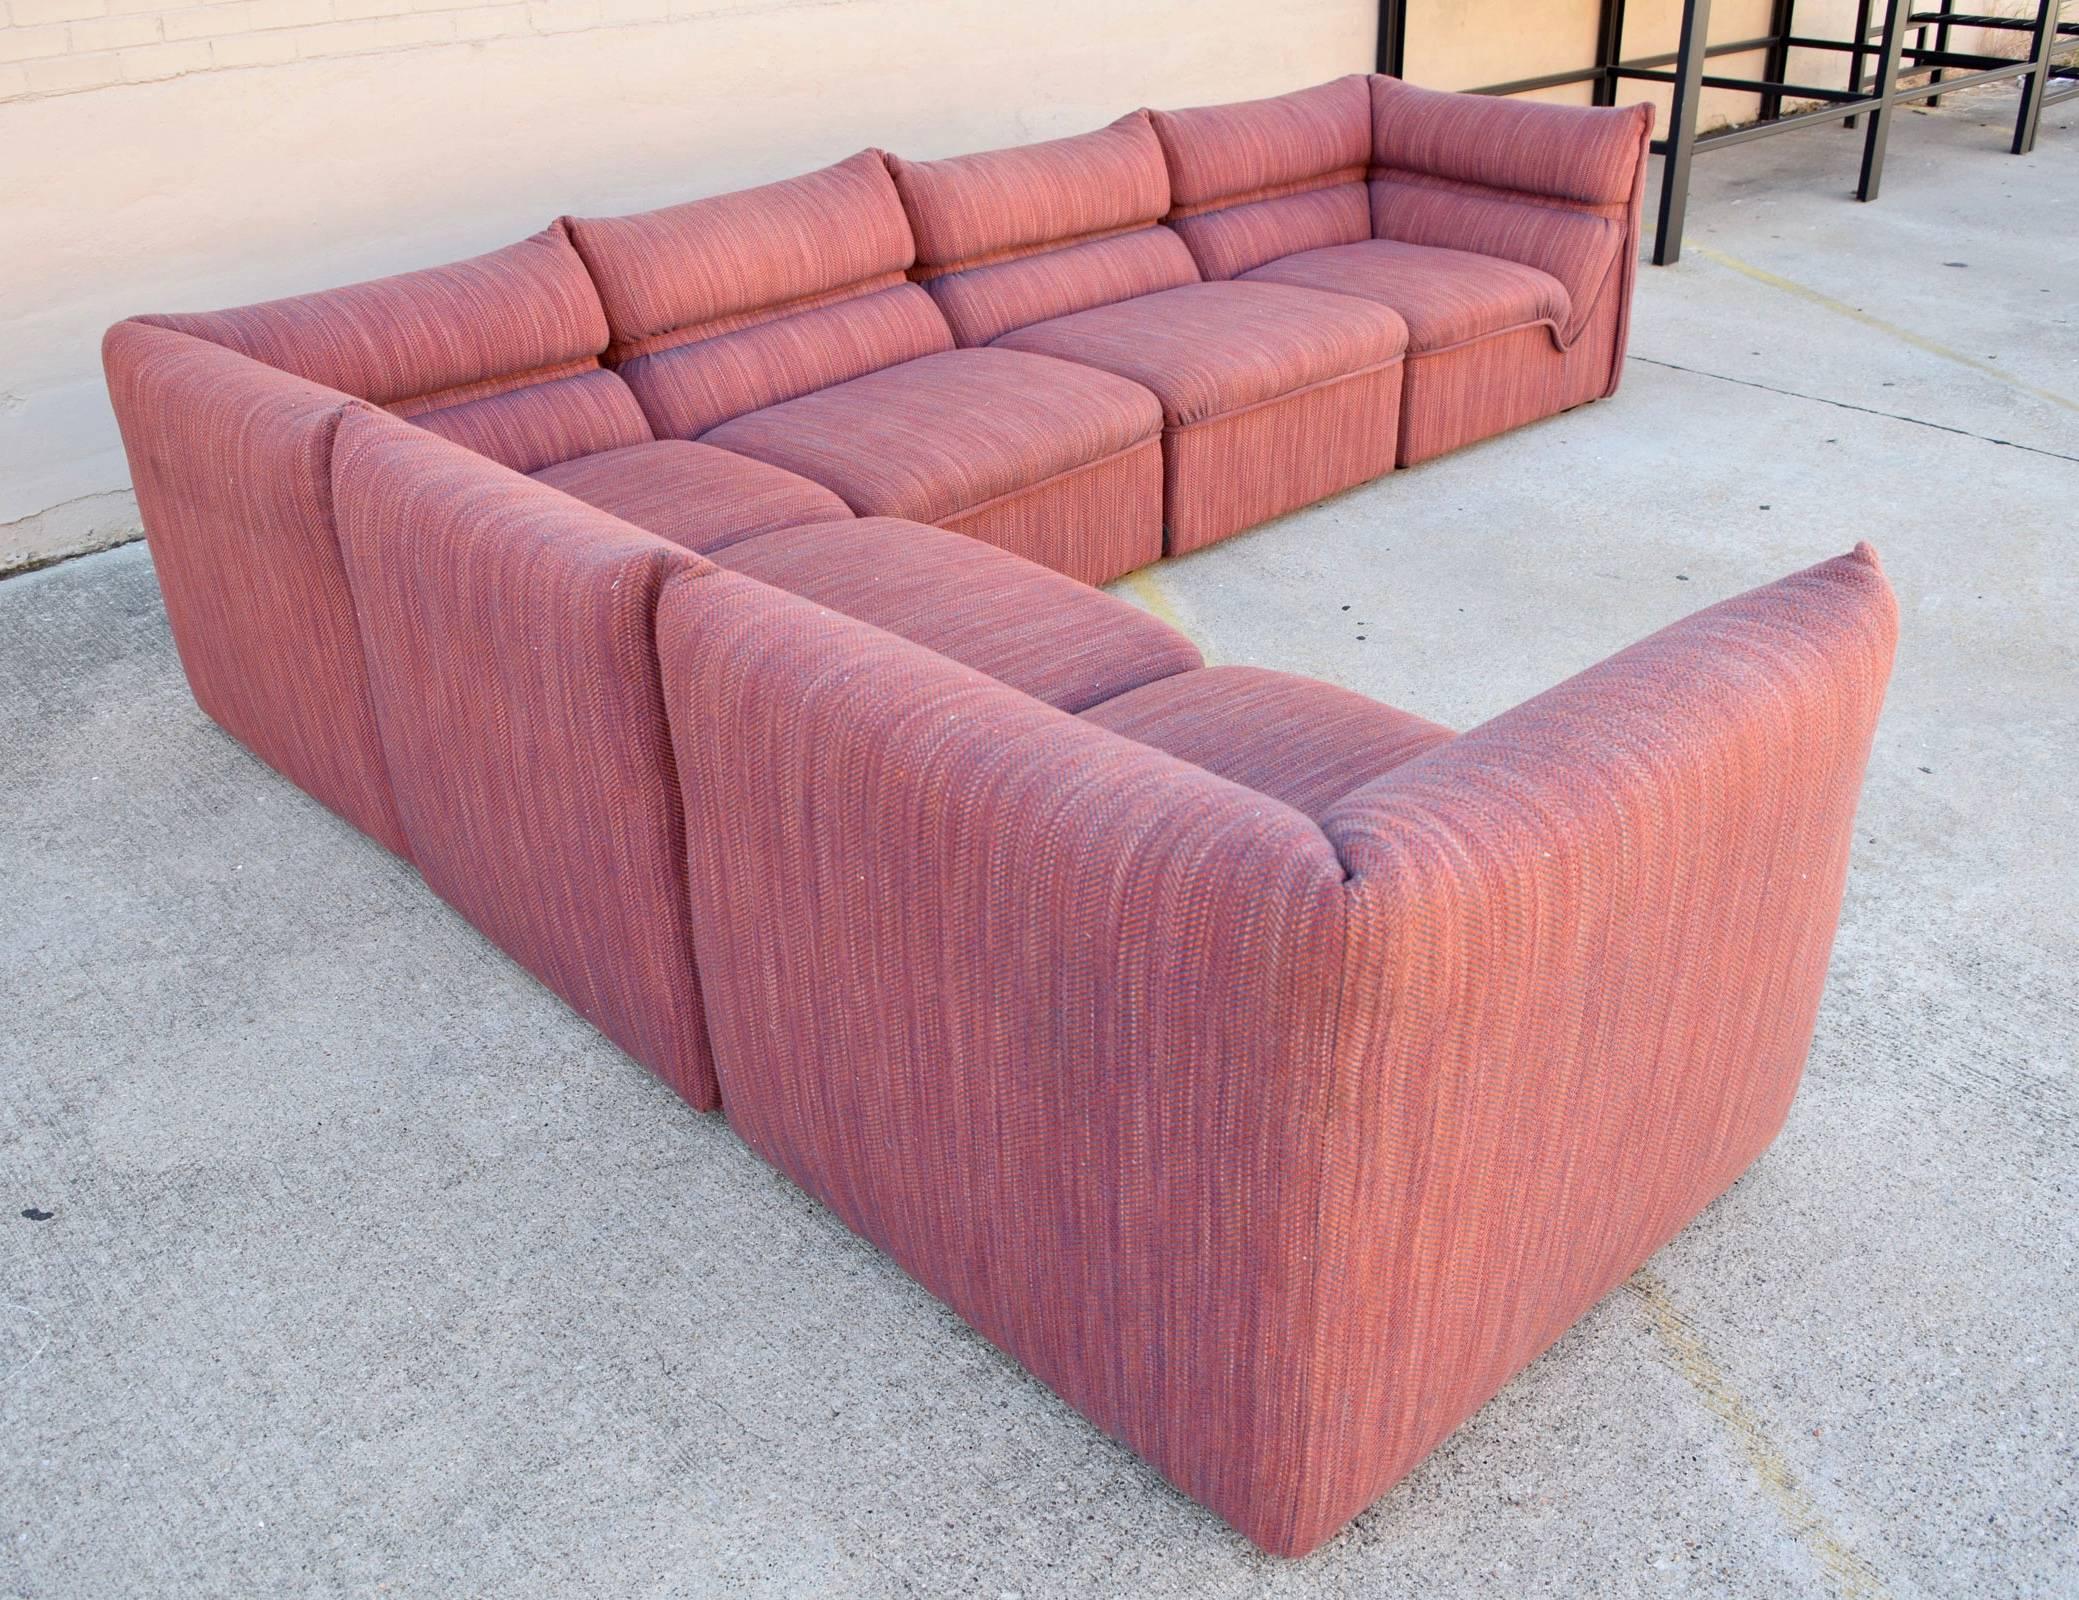 This is a beautiful sectional. Total of six pieces allowing for some versatility in configuration. Designed by Guido Faleschini and manufactured by Mariani for The Pace Collection. Labels are intact.